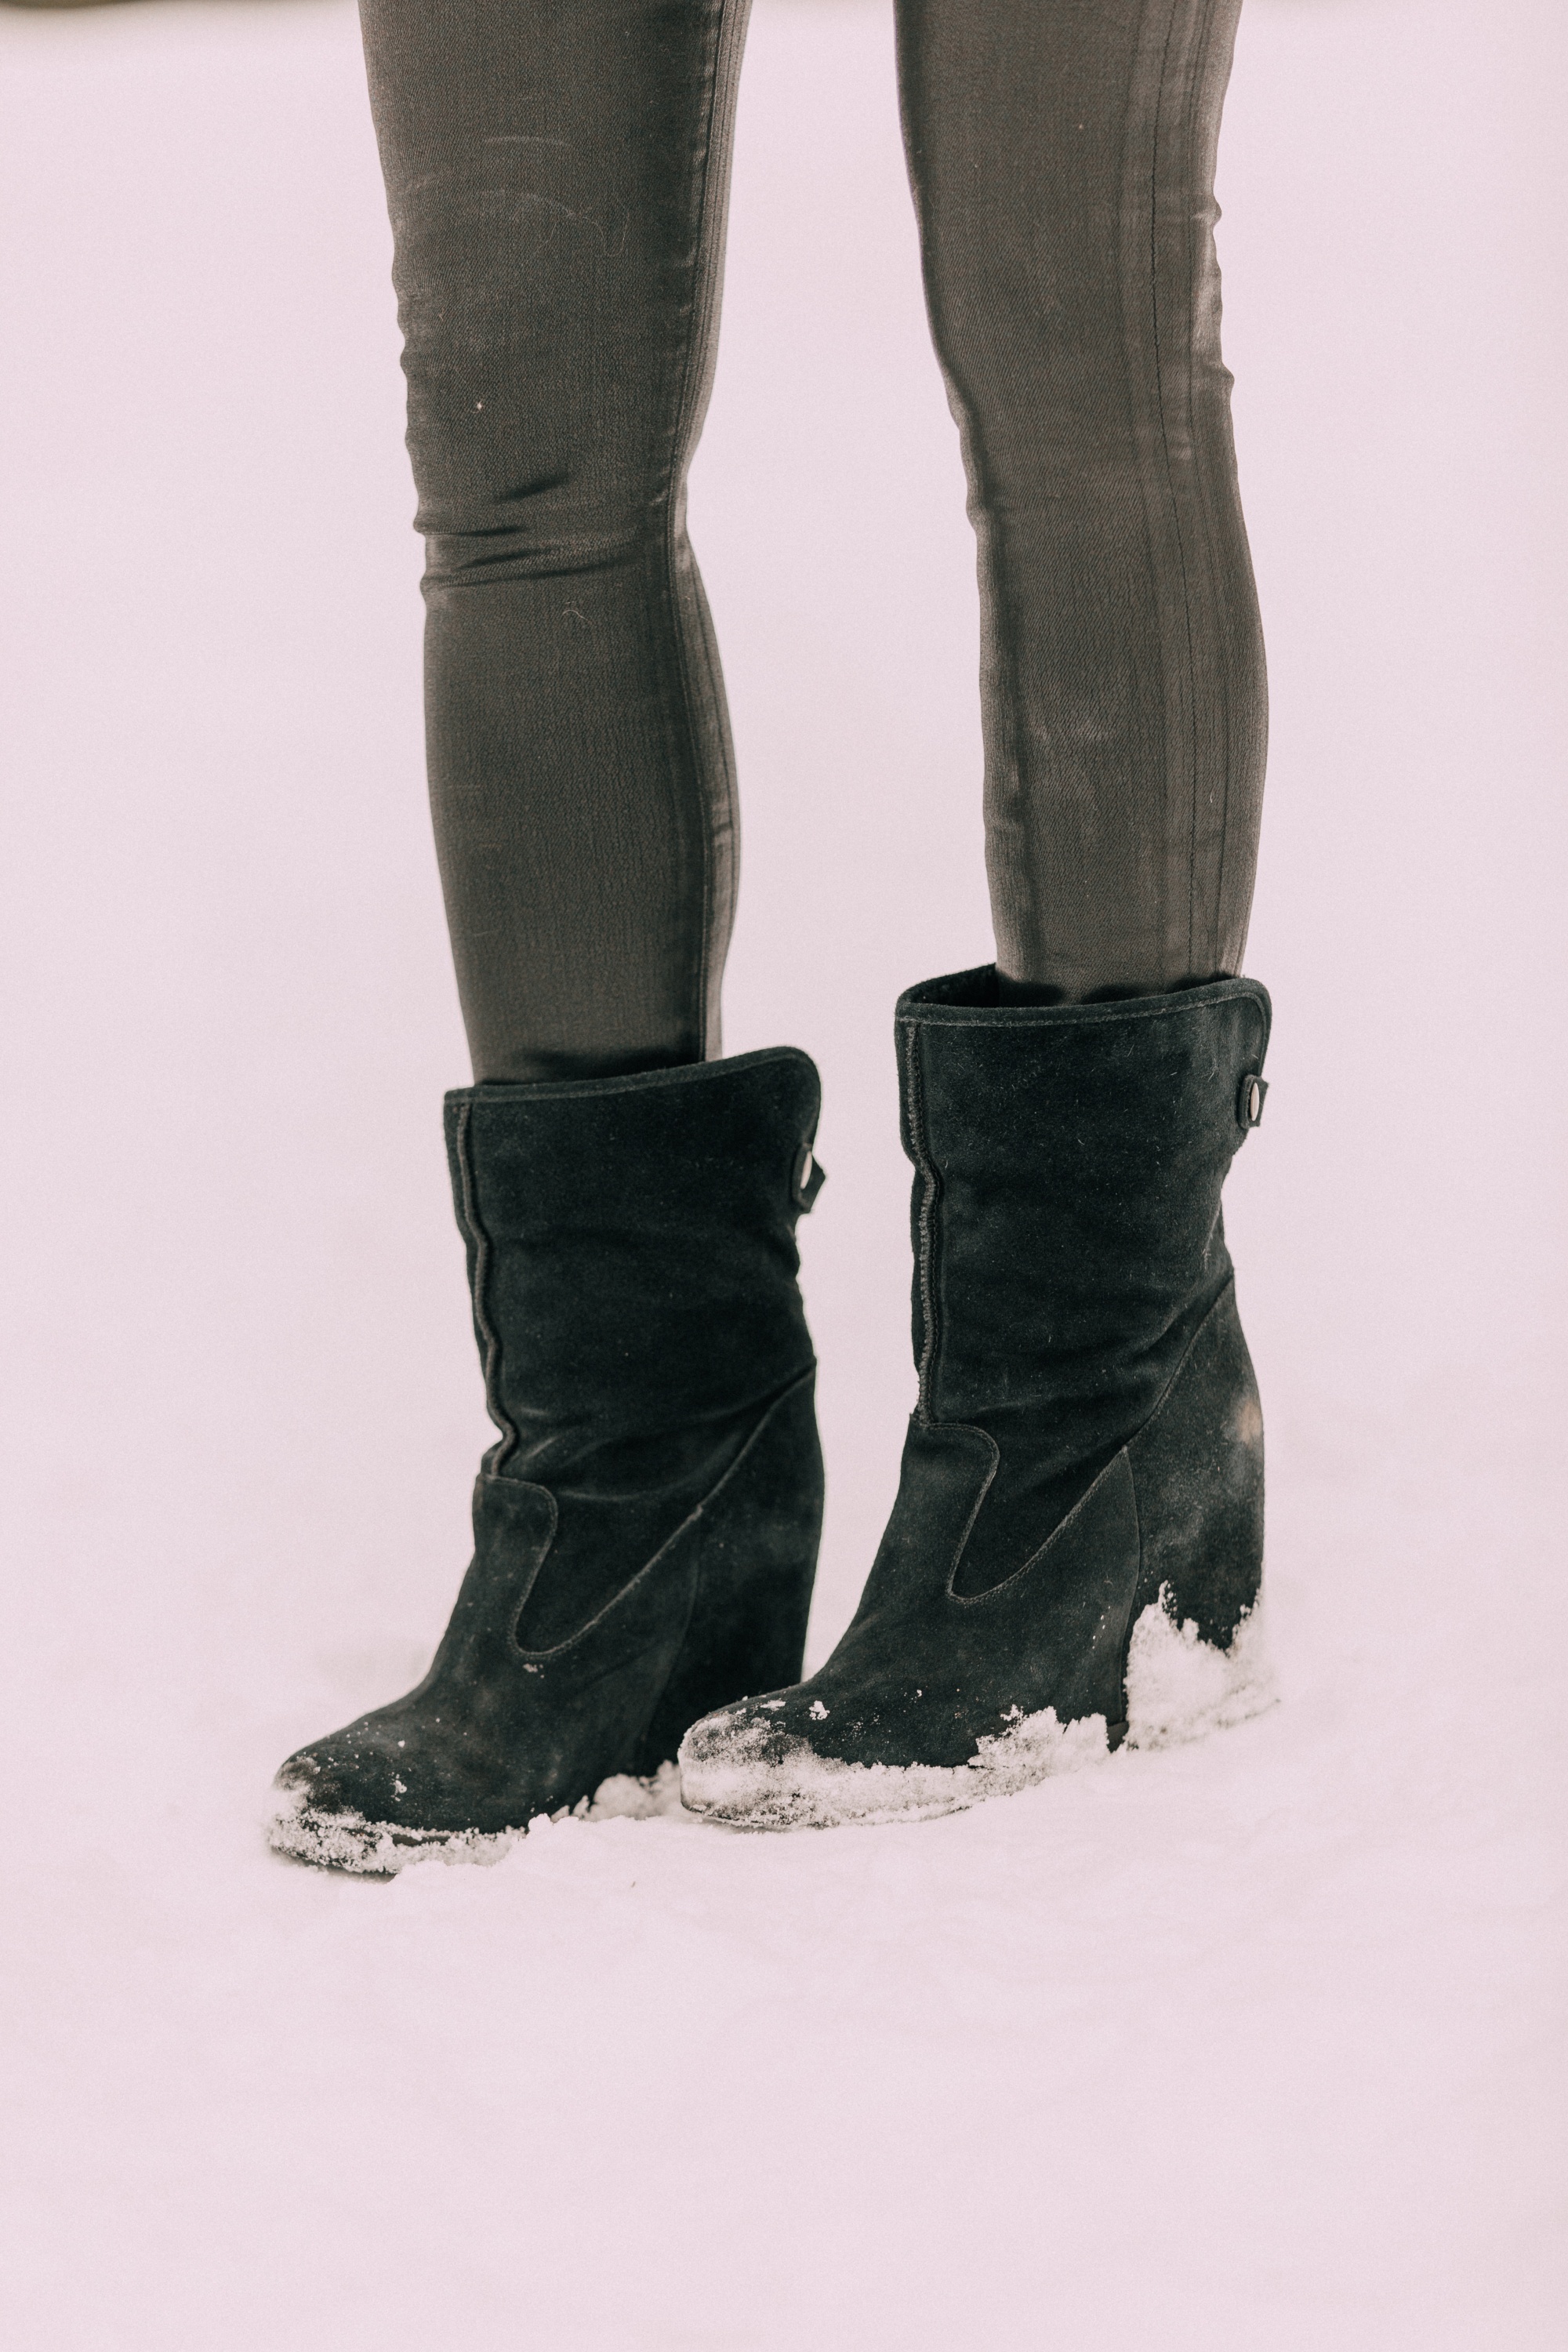 black wedge ugg boots to wear in snow, Erin Busbee fashion blogger over 40, cold weather accessories